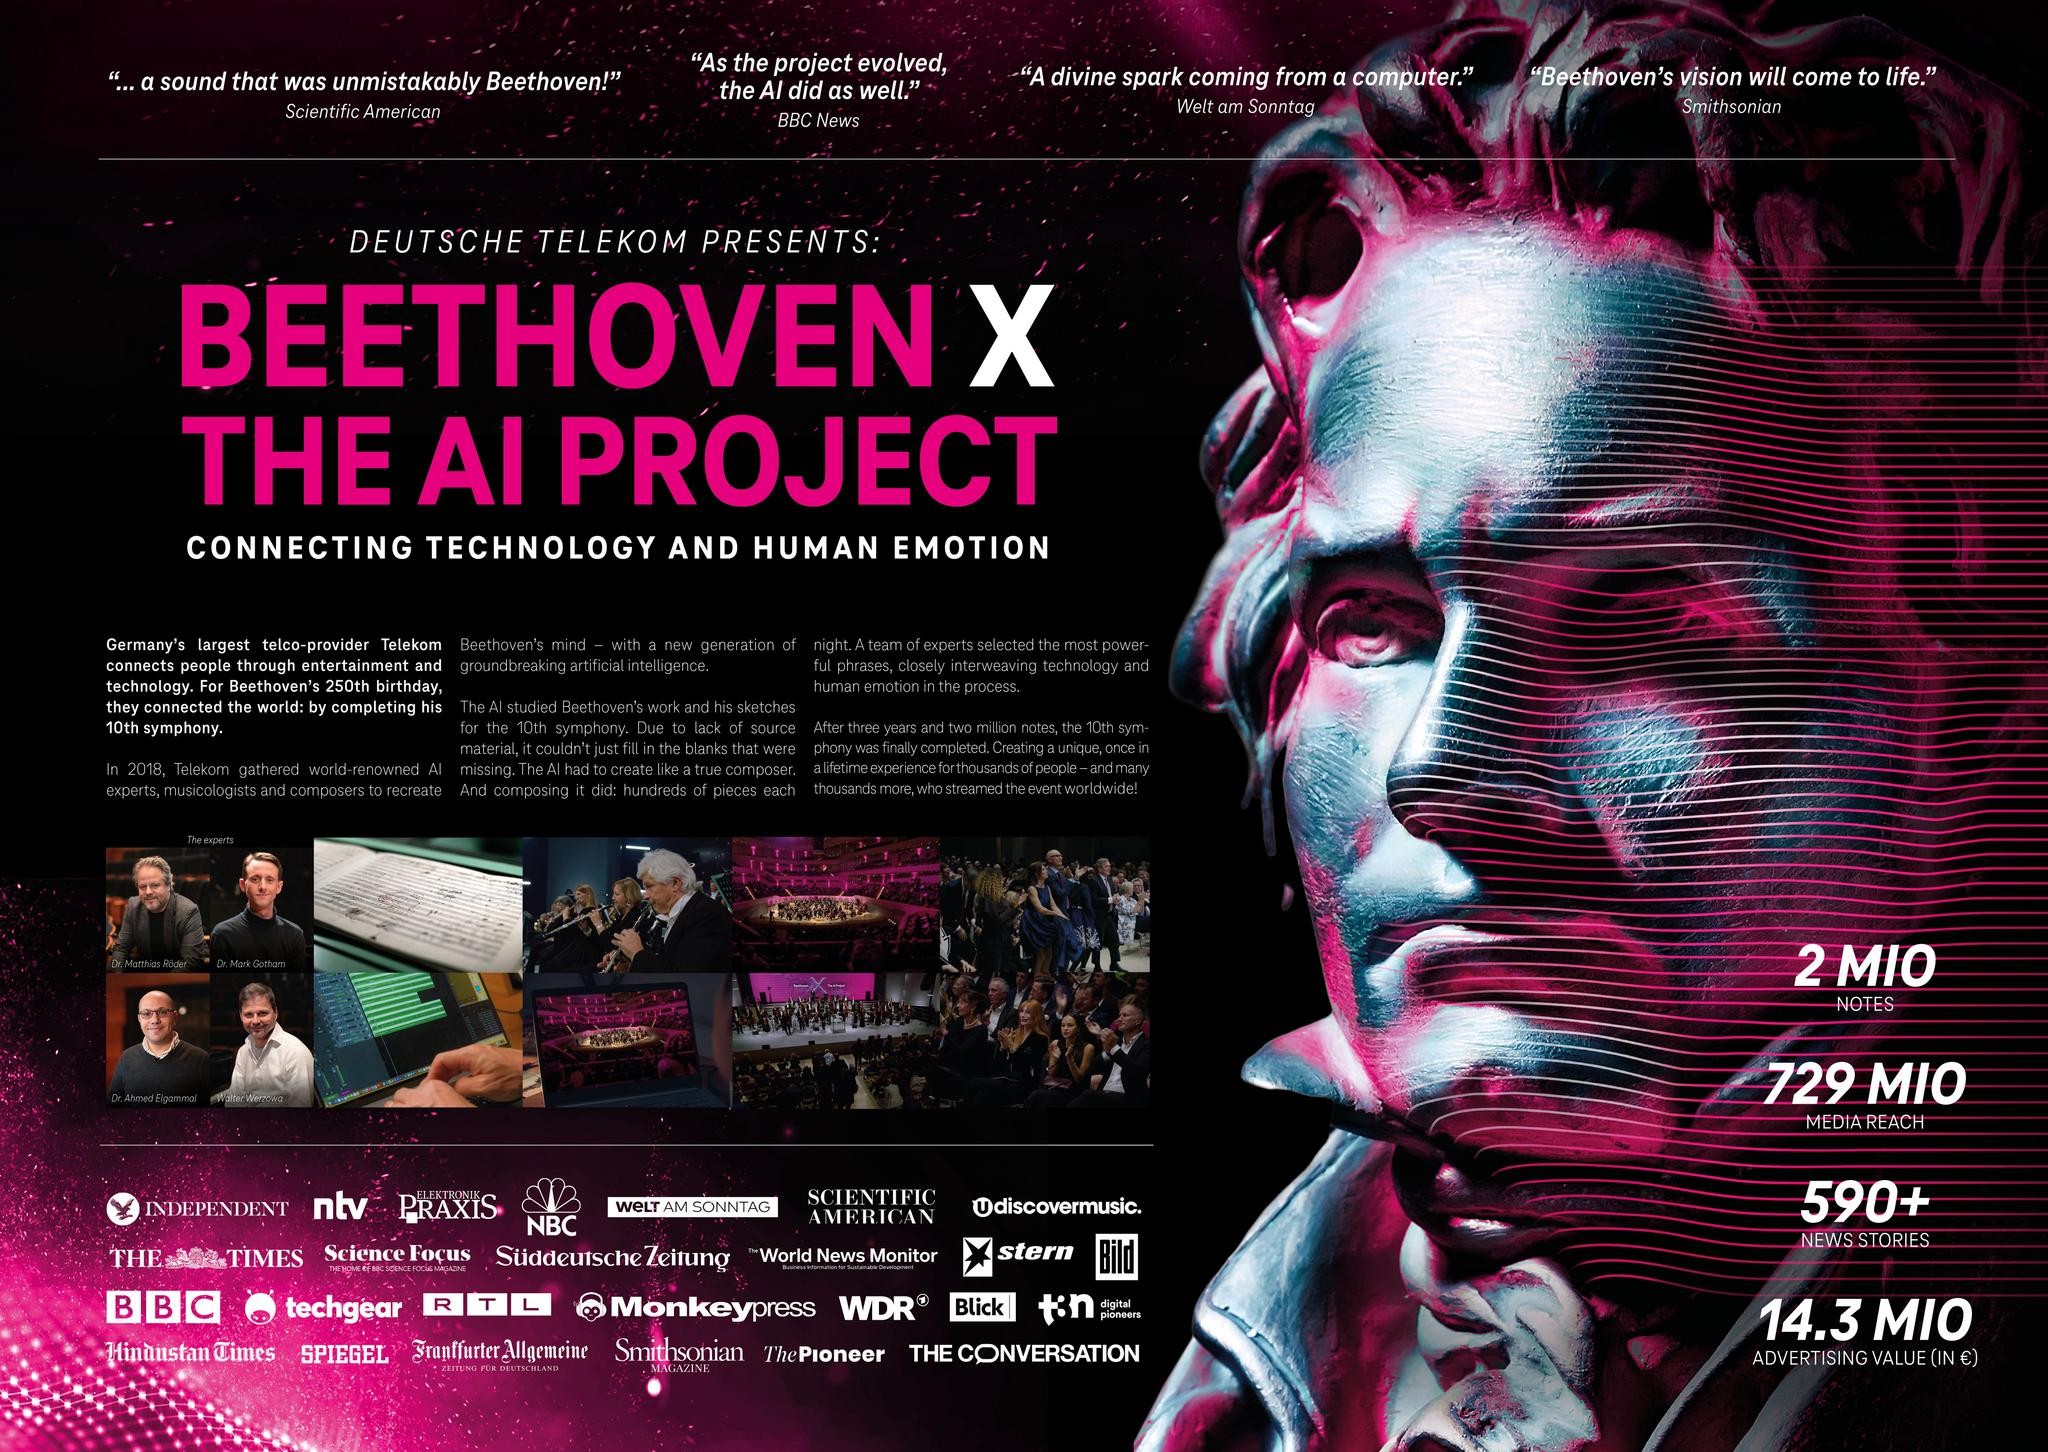 BEETHOVEN X - THE AI PROJECT